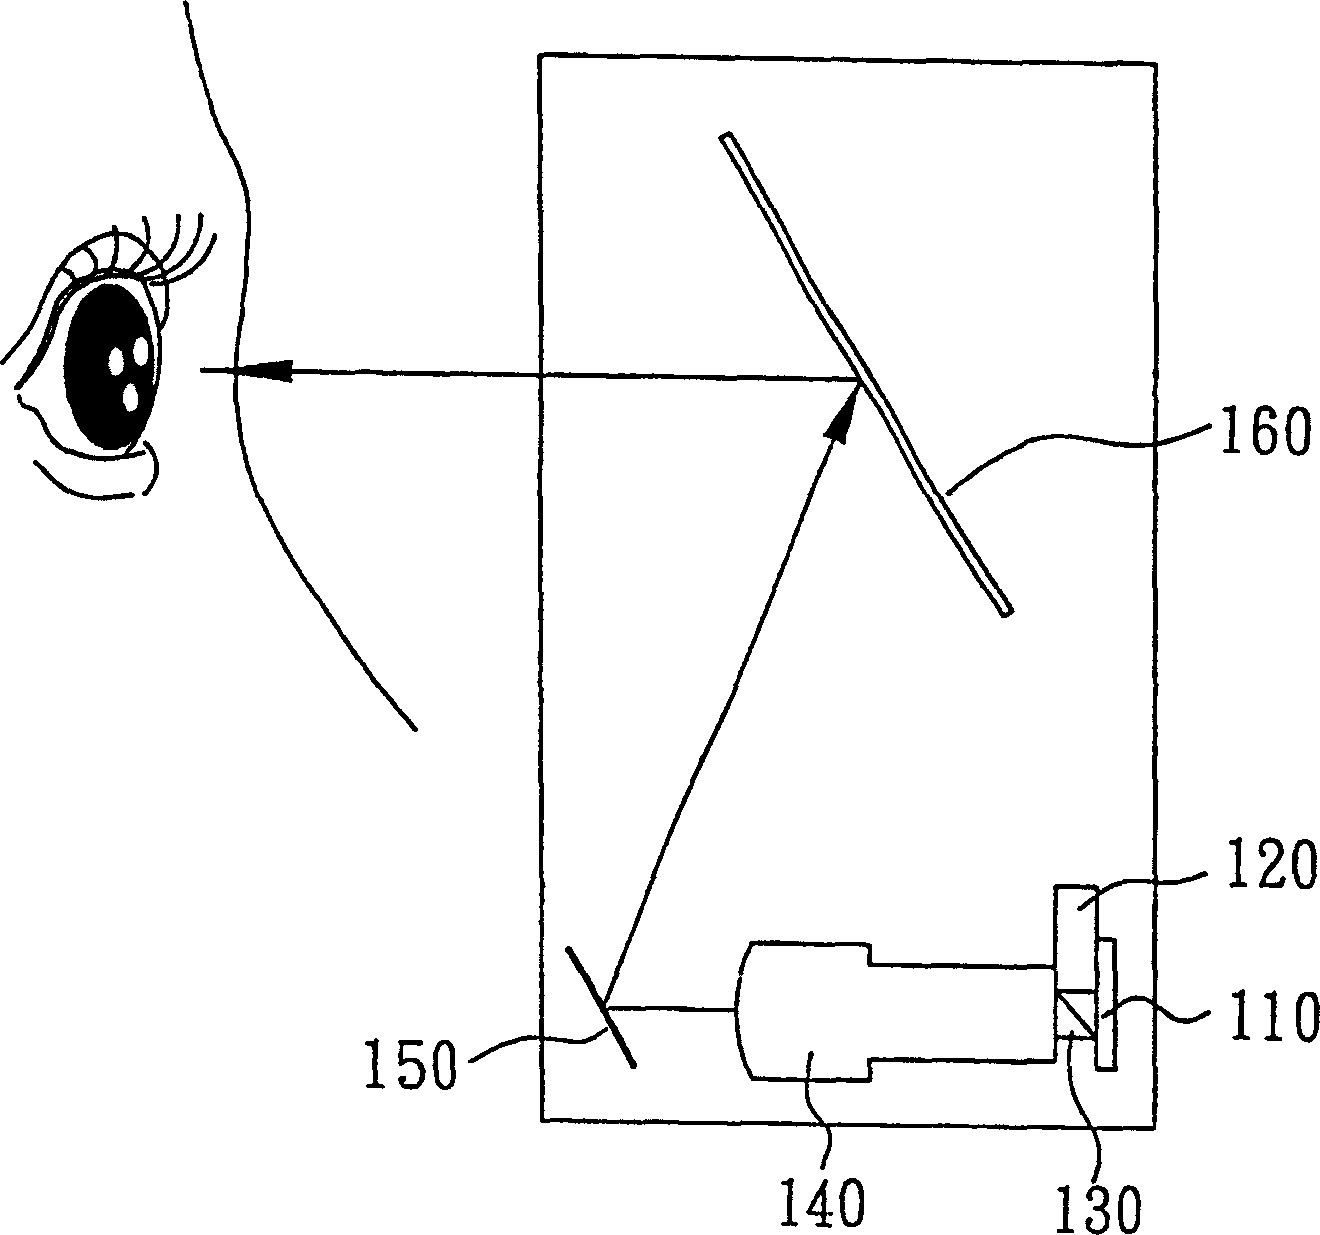 Double block refraction image display device with visual focal length compressing set